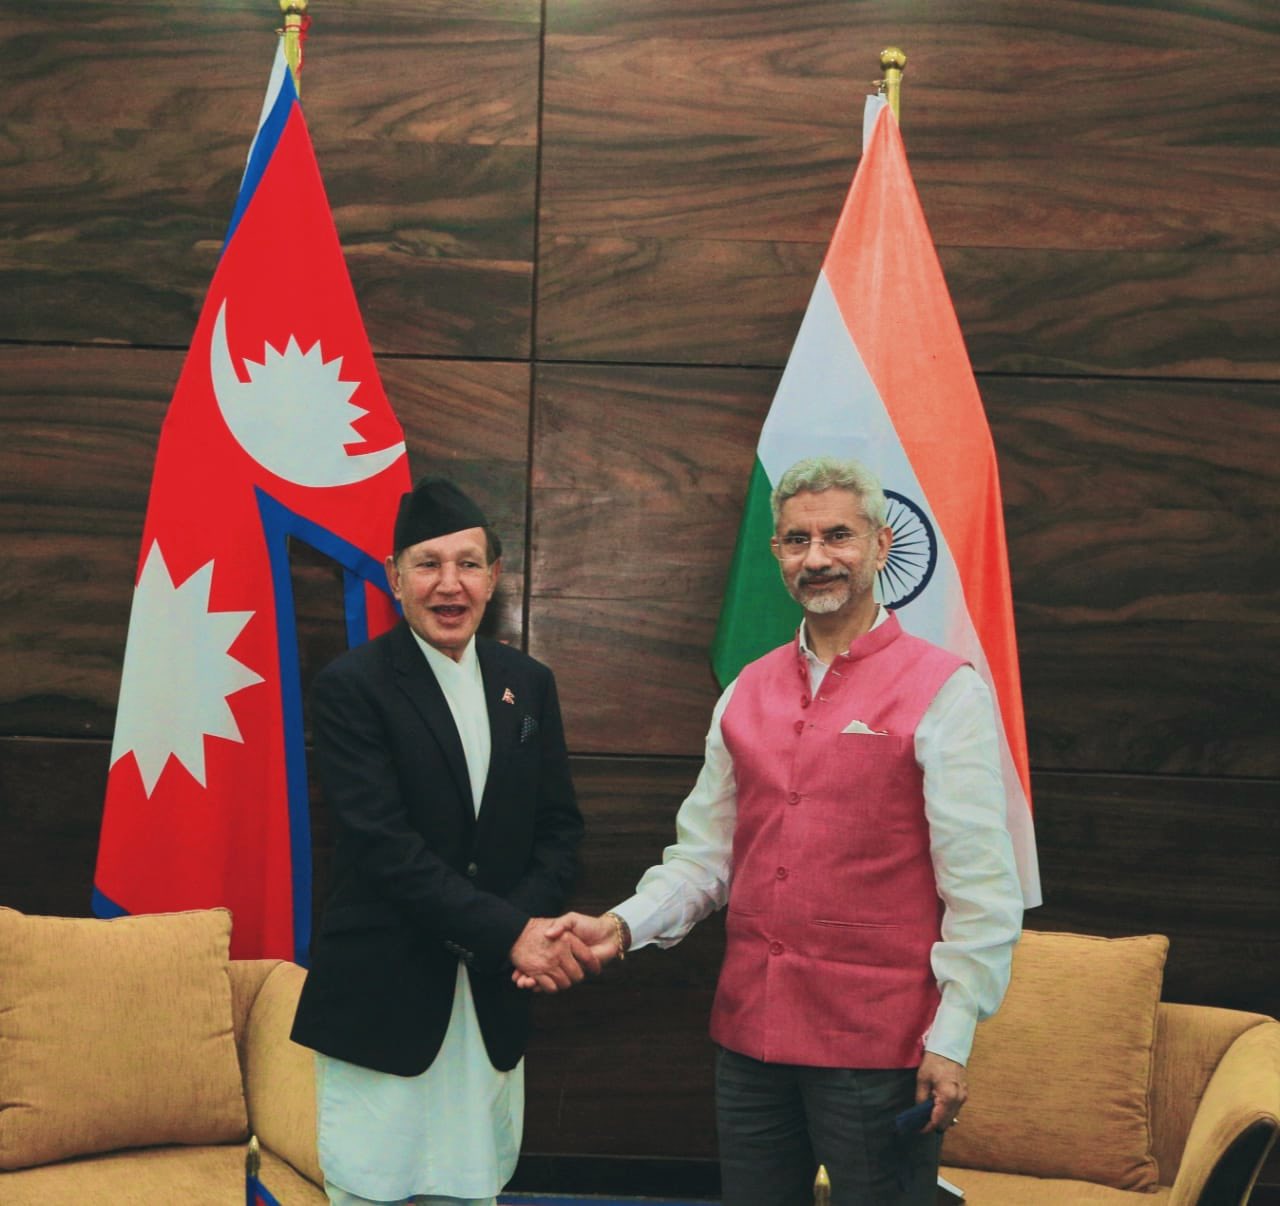 Foreign Minister Dr. Khadka meets Indian counterpart Jaishankar in Colombo